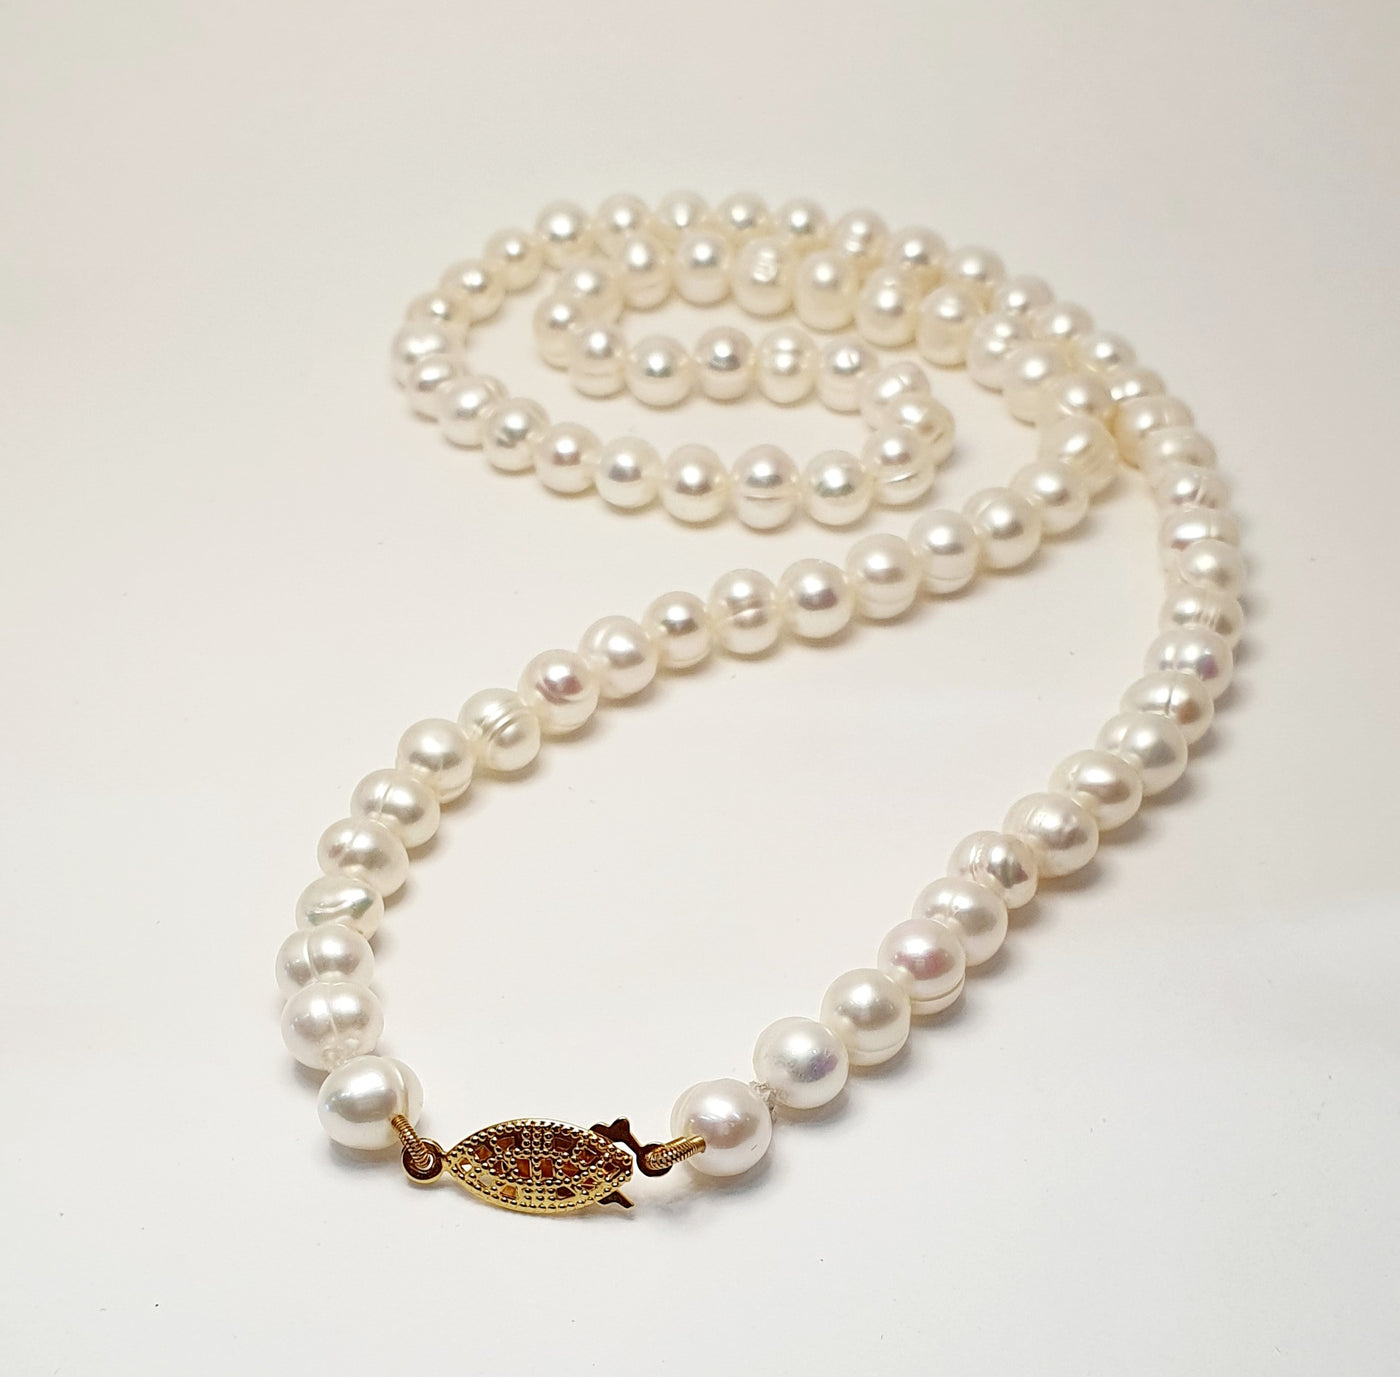 Freshwater Pearl 55cm Necklace with Gold Plated Clasp